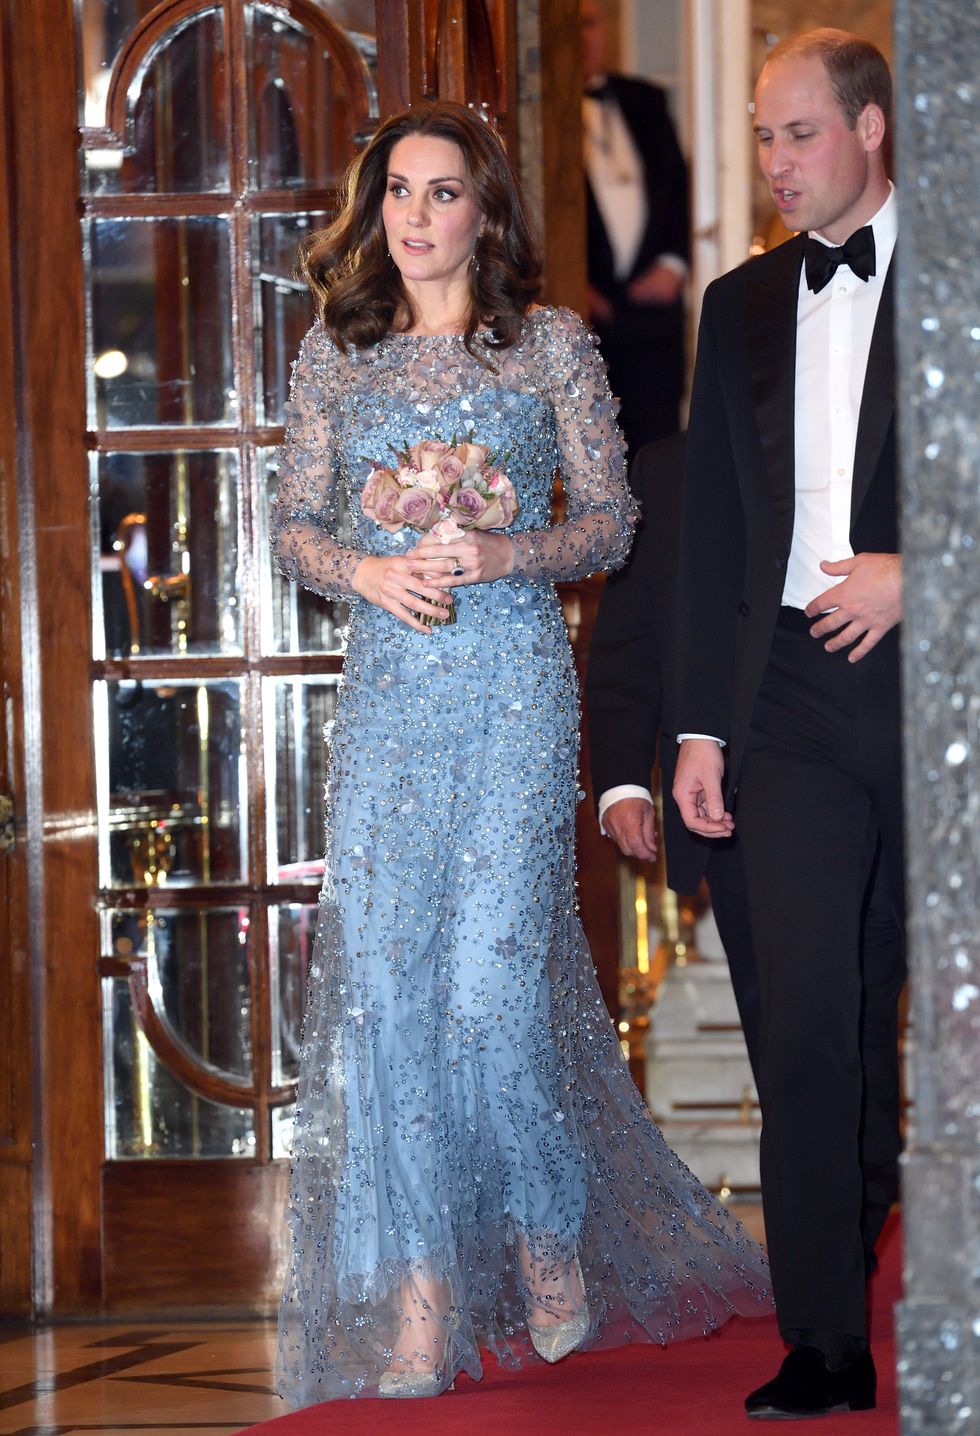 The Duchess of Cambridge at the royal variety performance